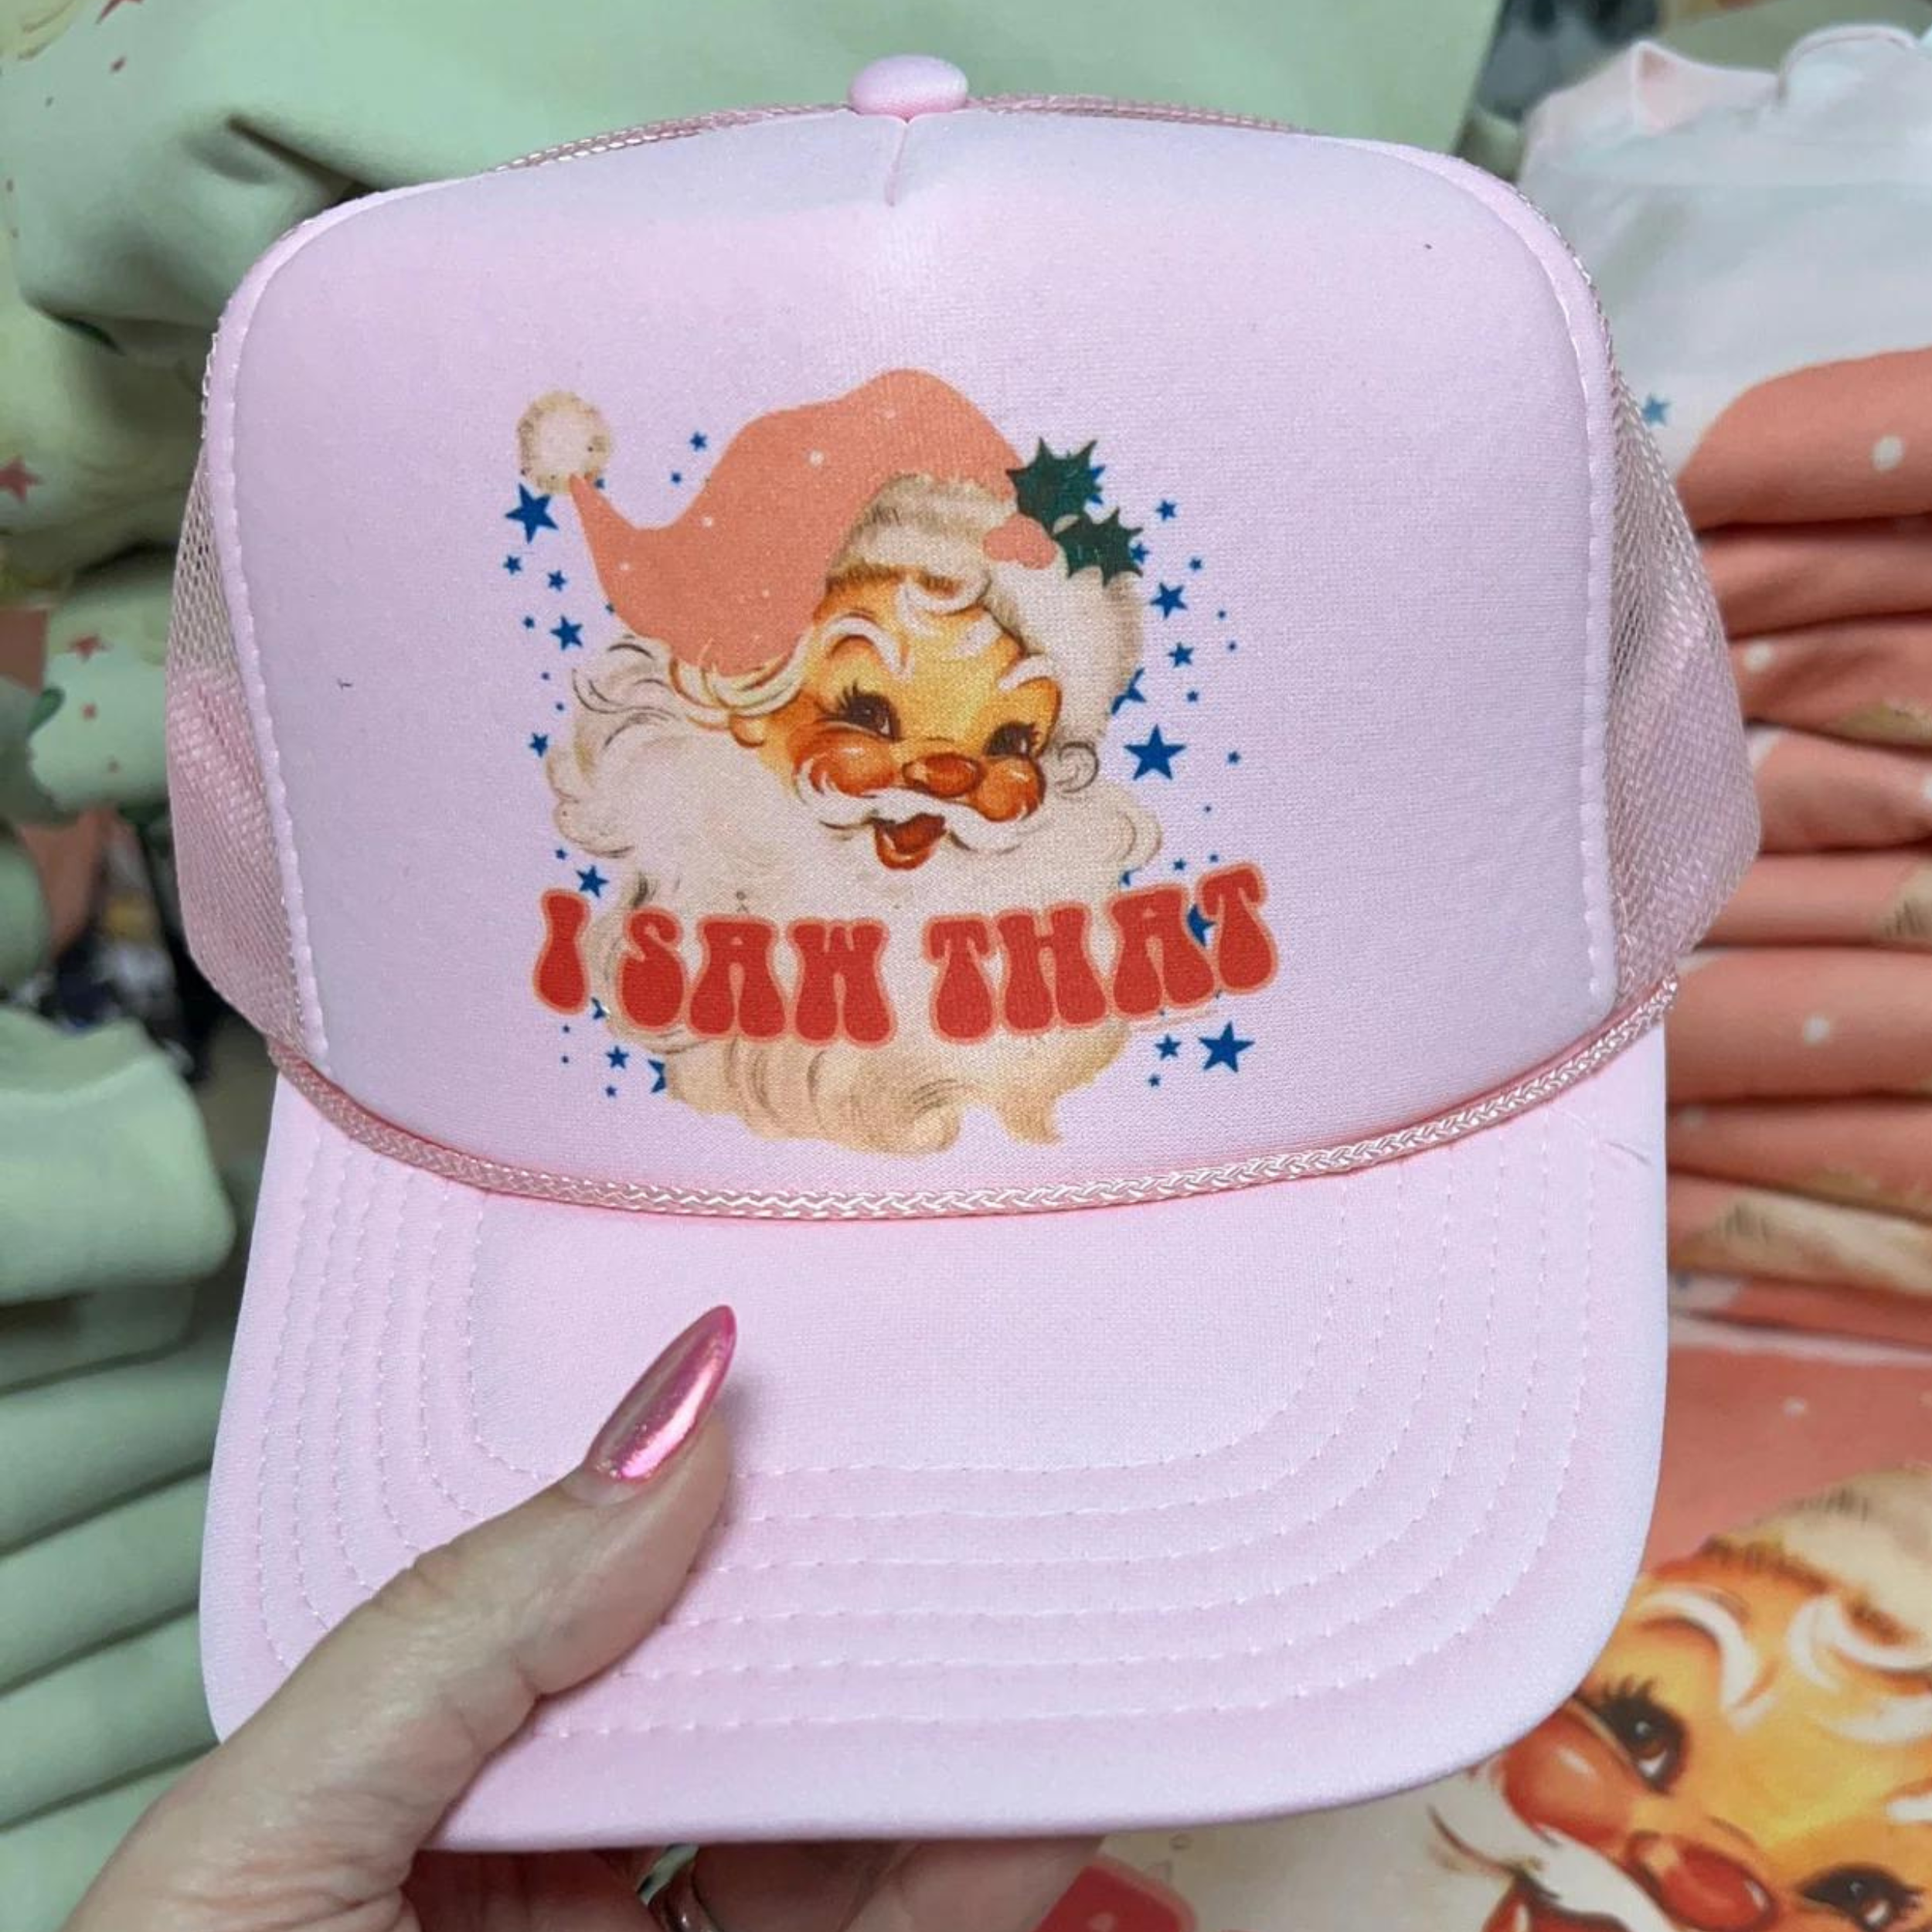 Photo features a light pink trucker hat that says "I Saw That" with a picture of Santa on the front.